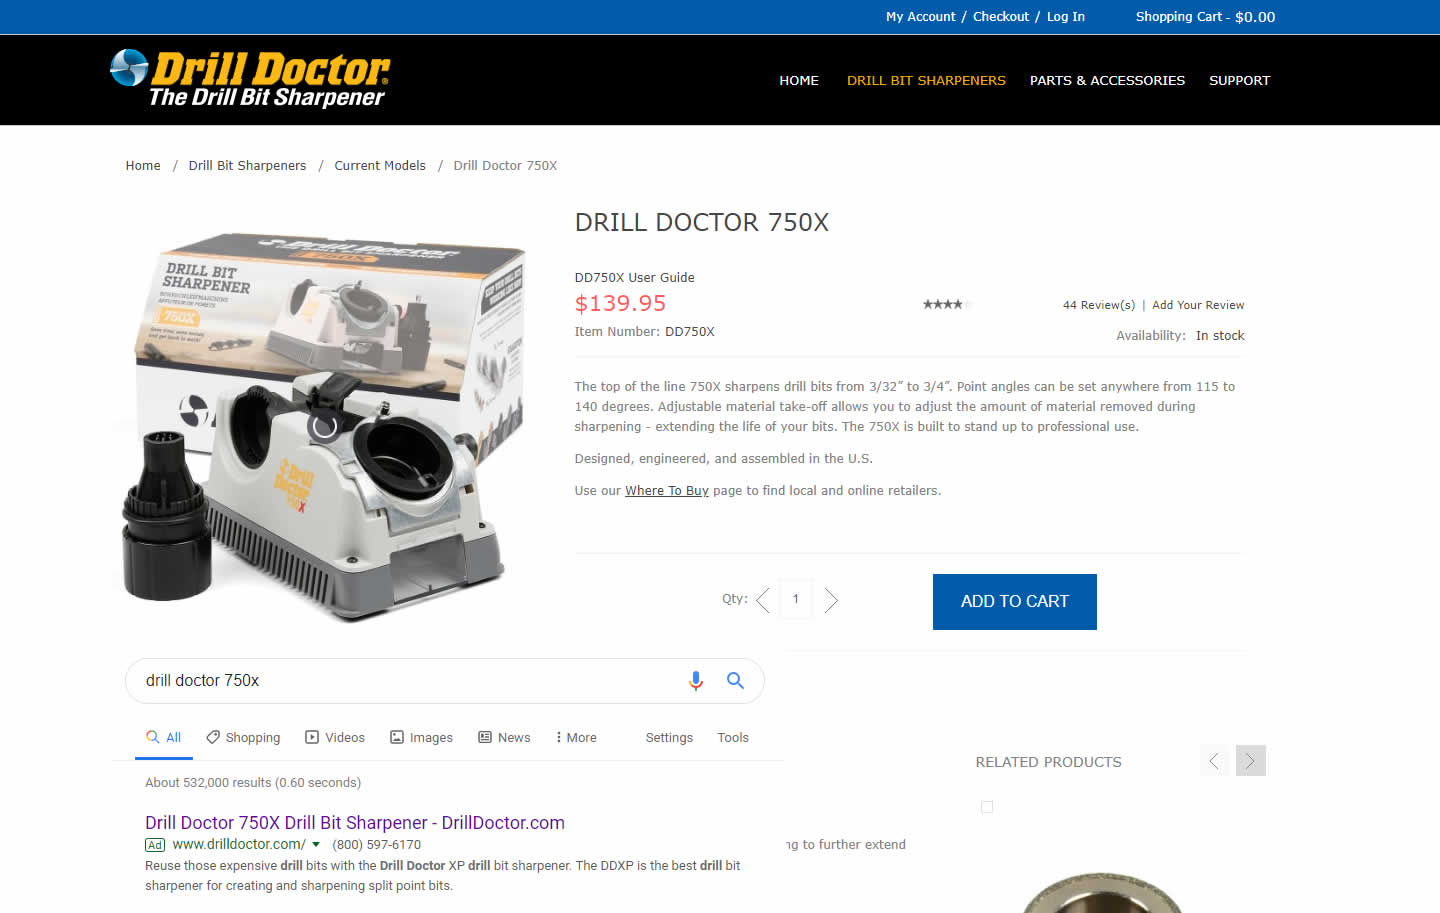 Drill Doctor Paid Search Engine Marketing Portfolio Example